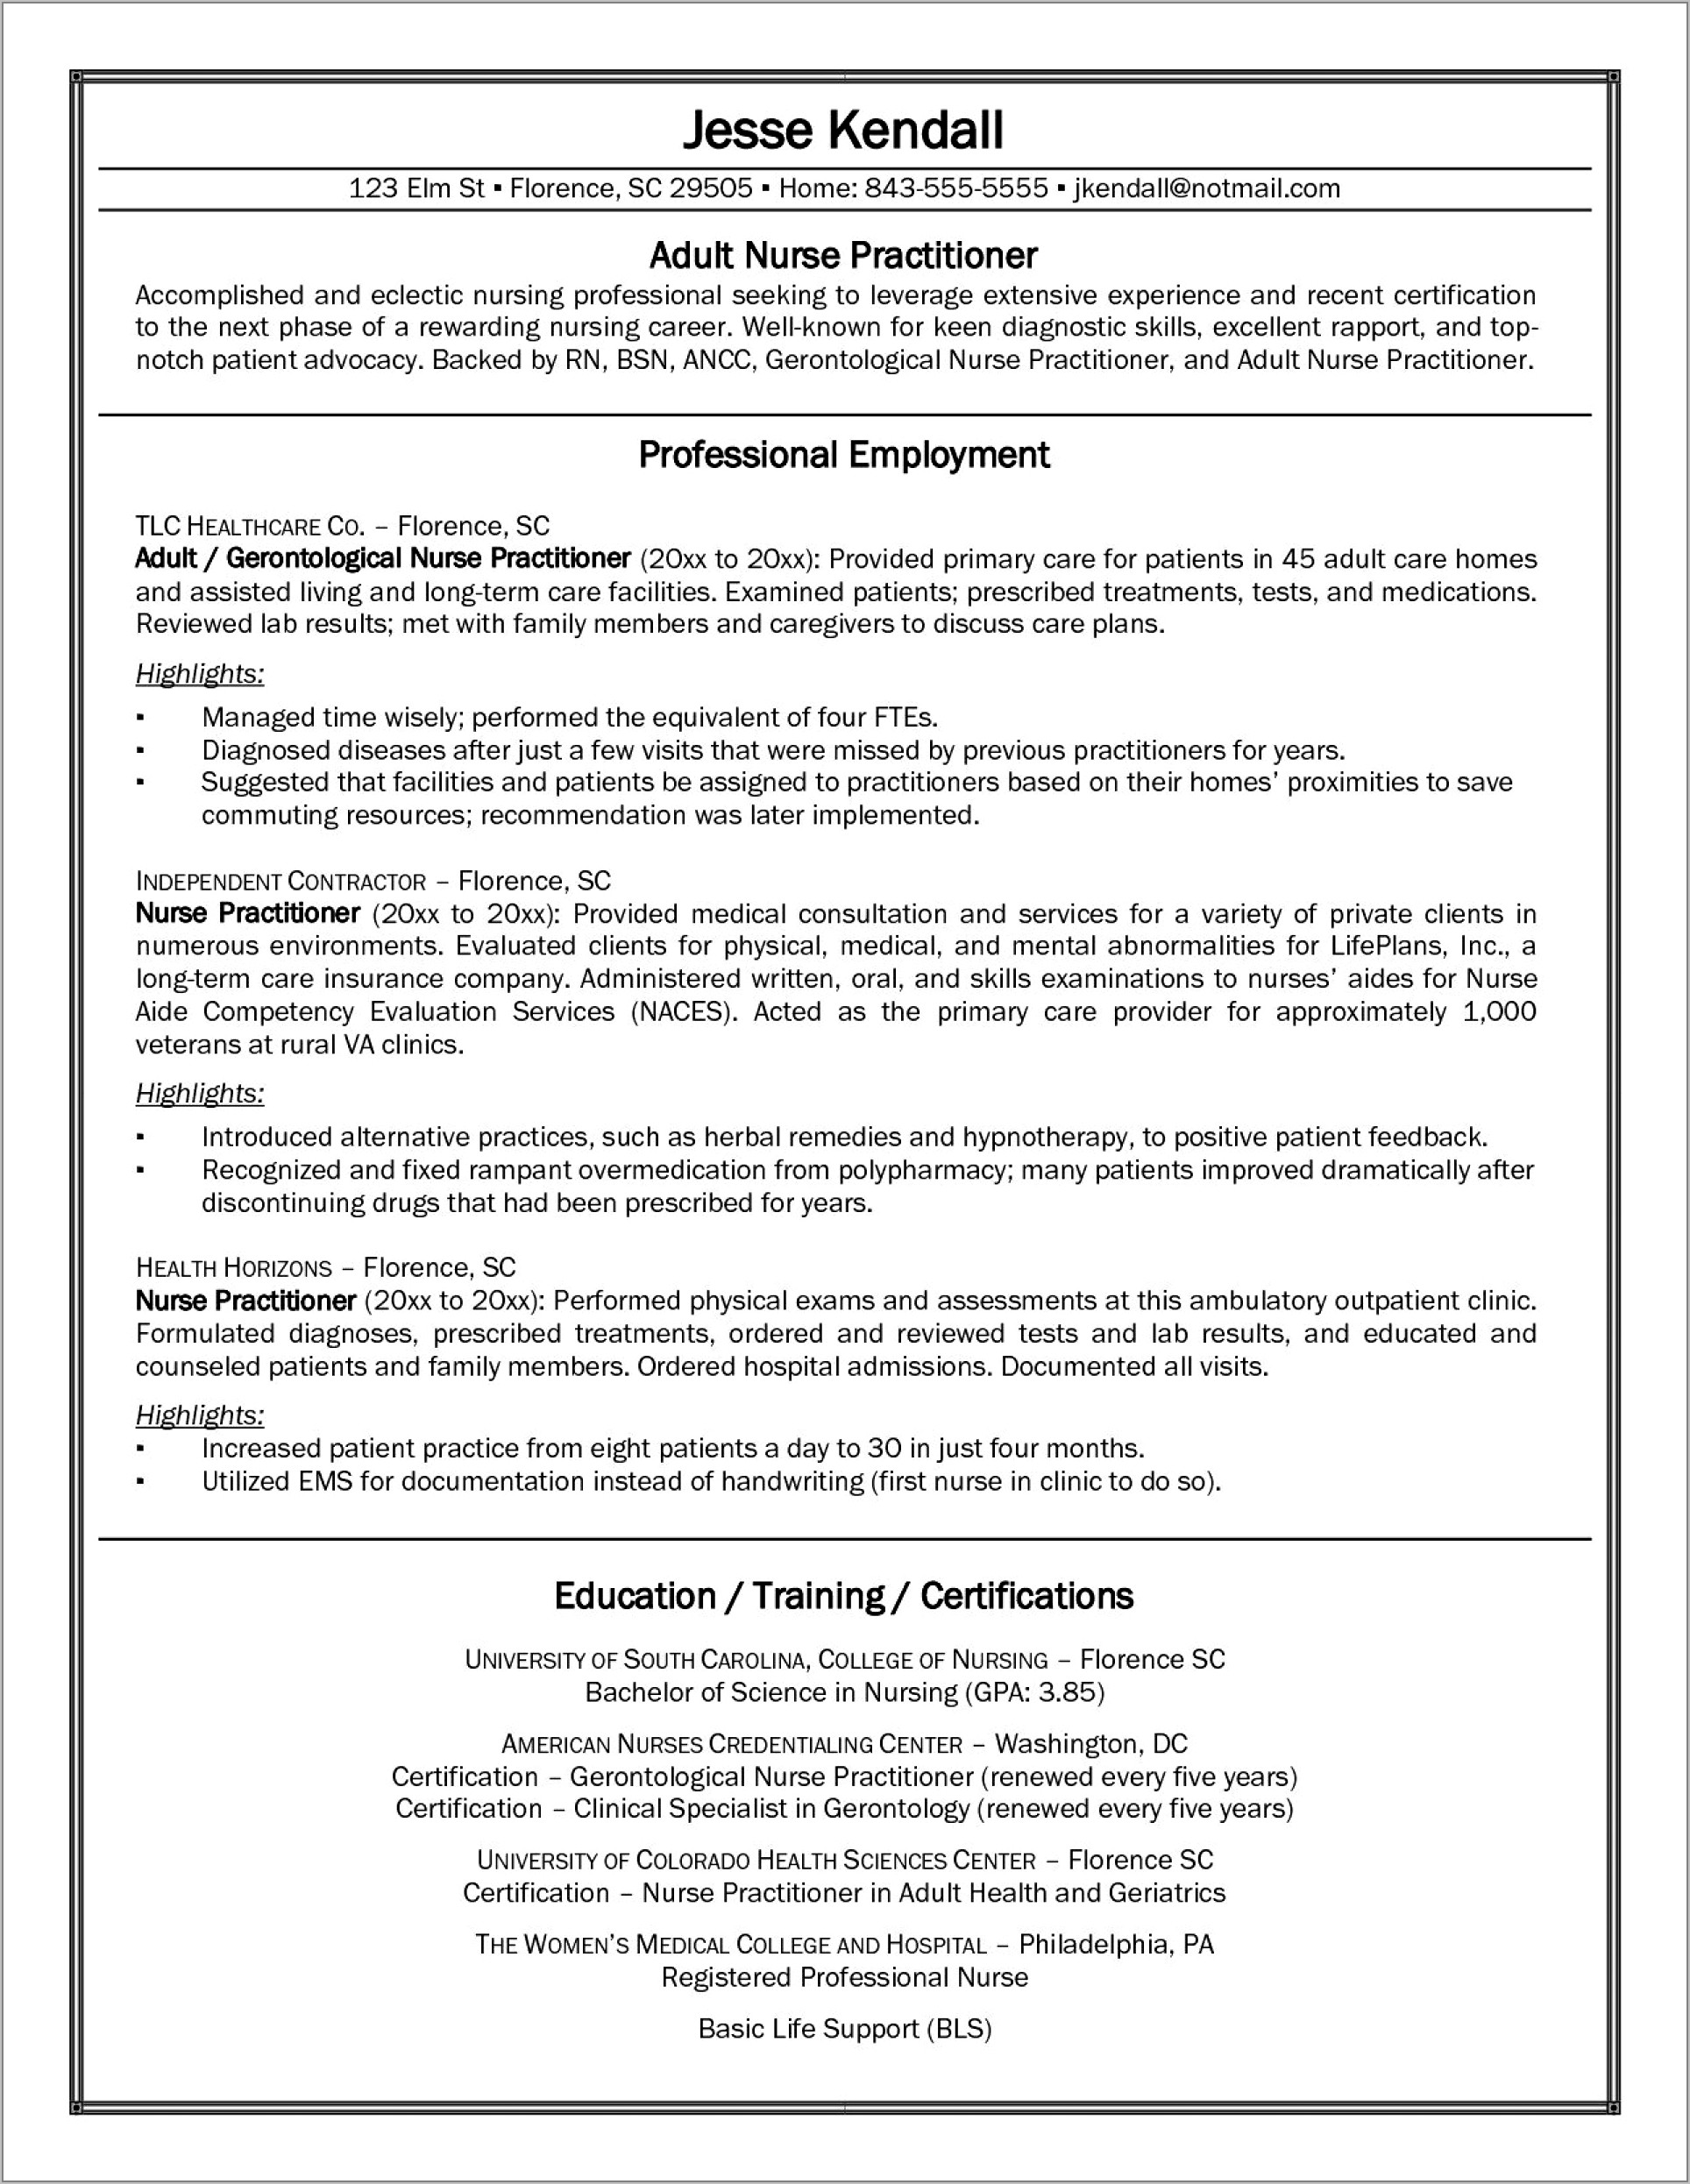 Free Resume Templates For Nurse Practitioners